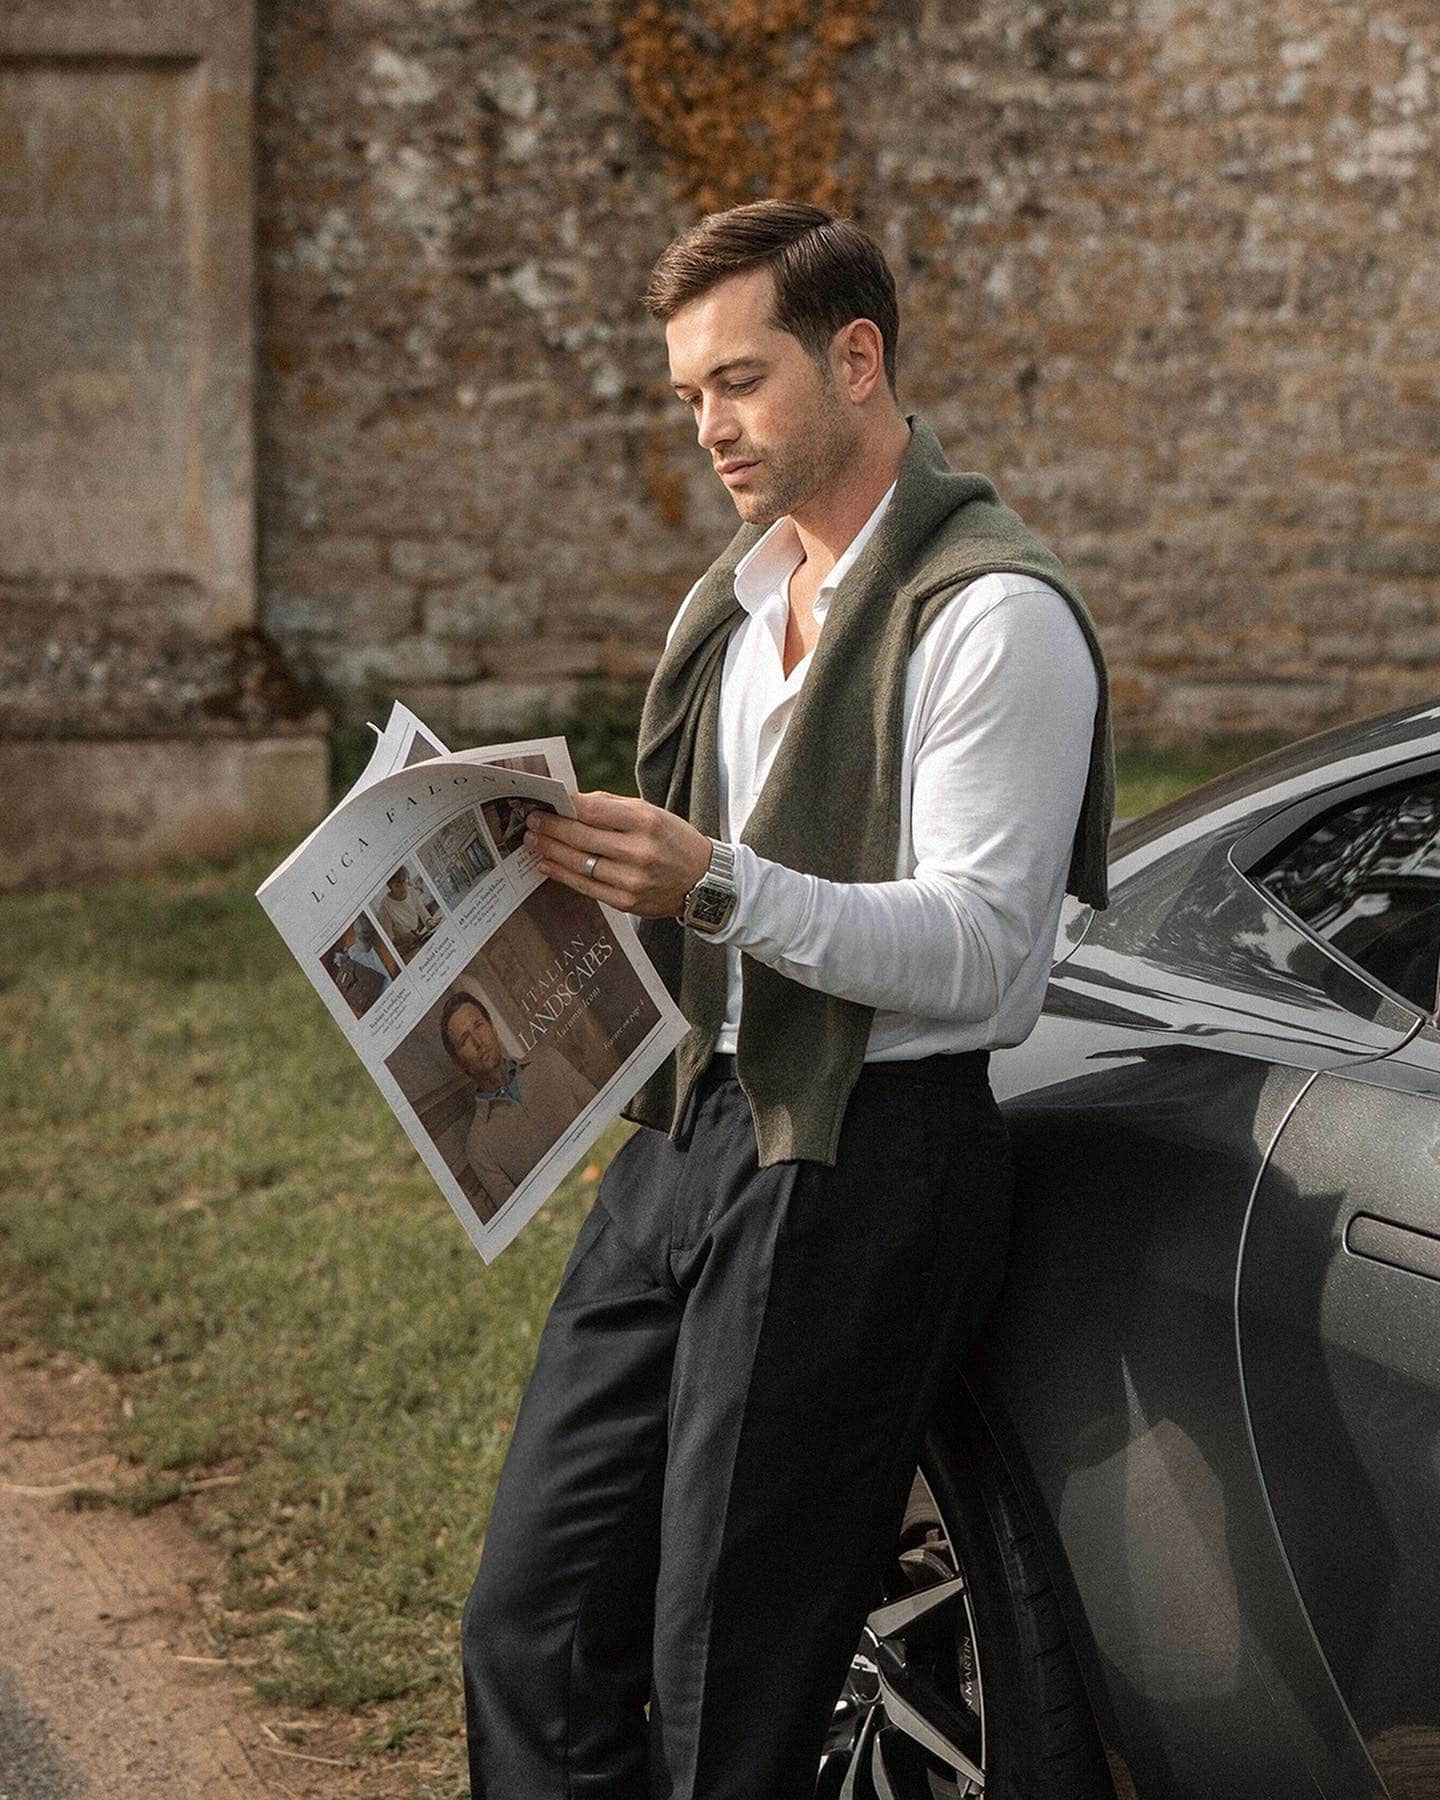 man leaning on a car while reading the papers